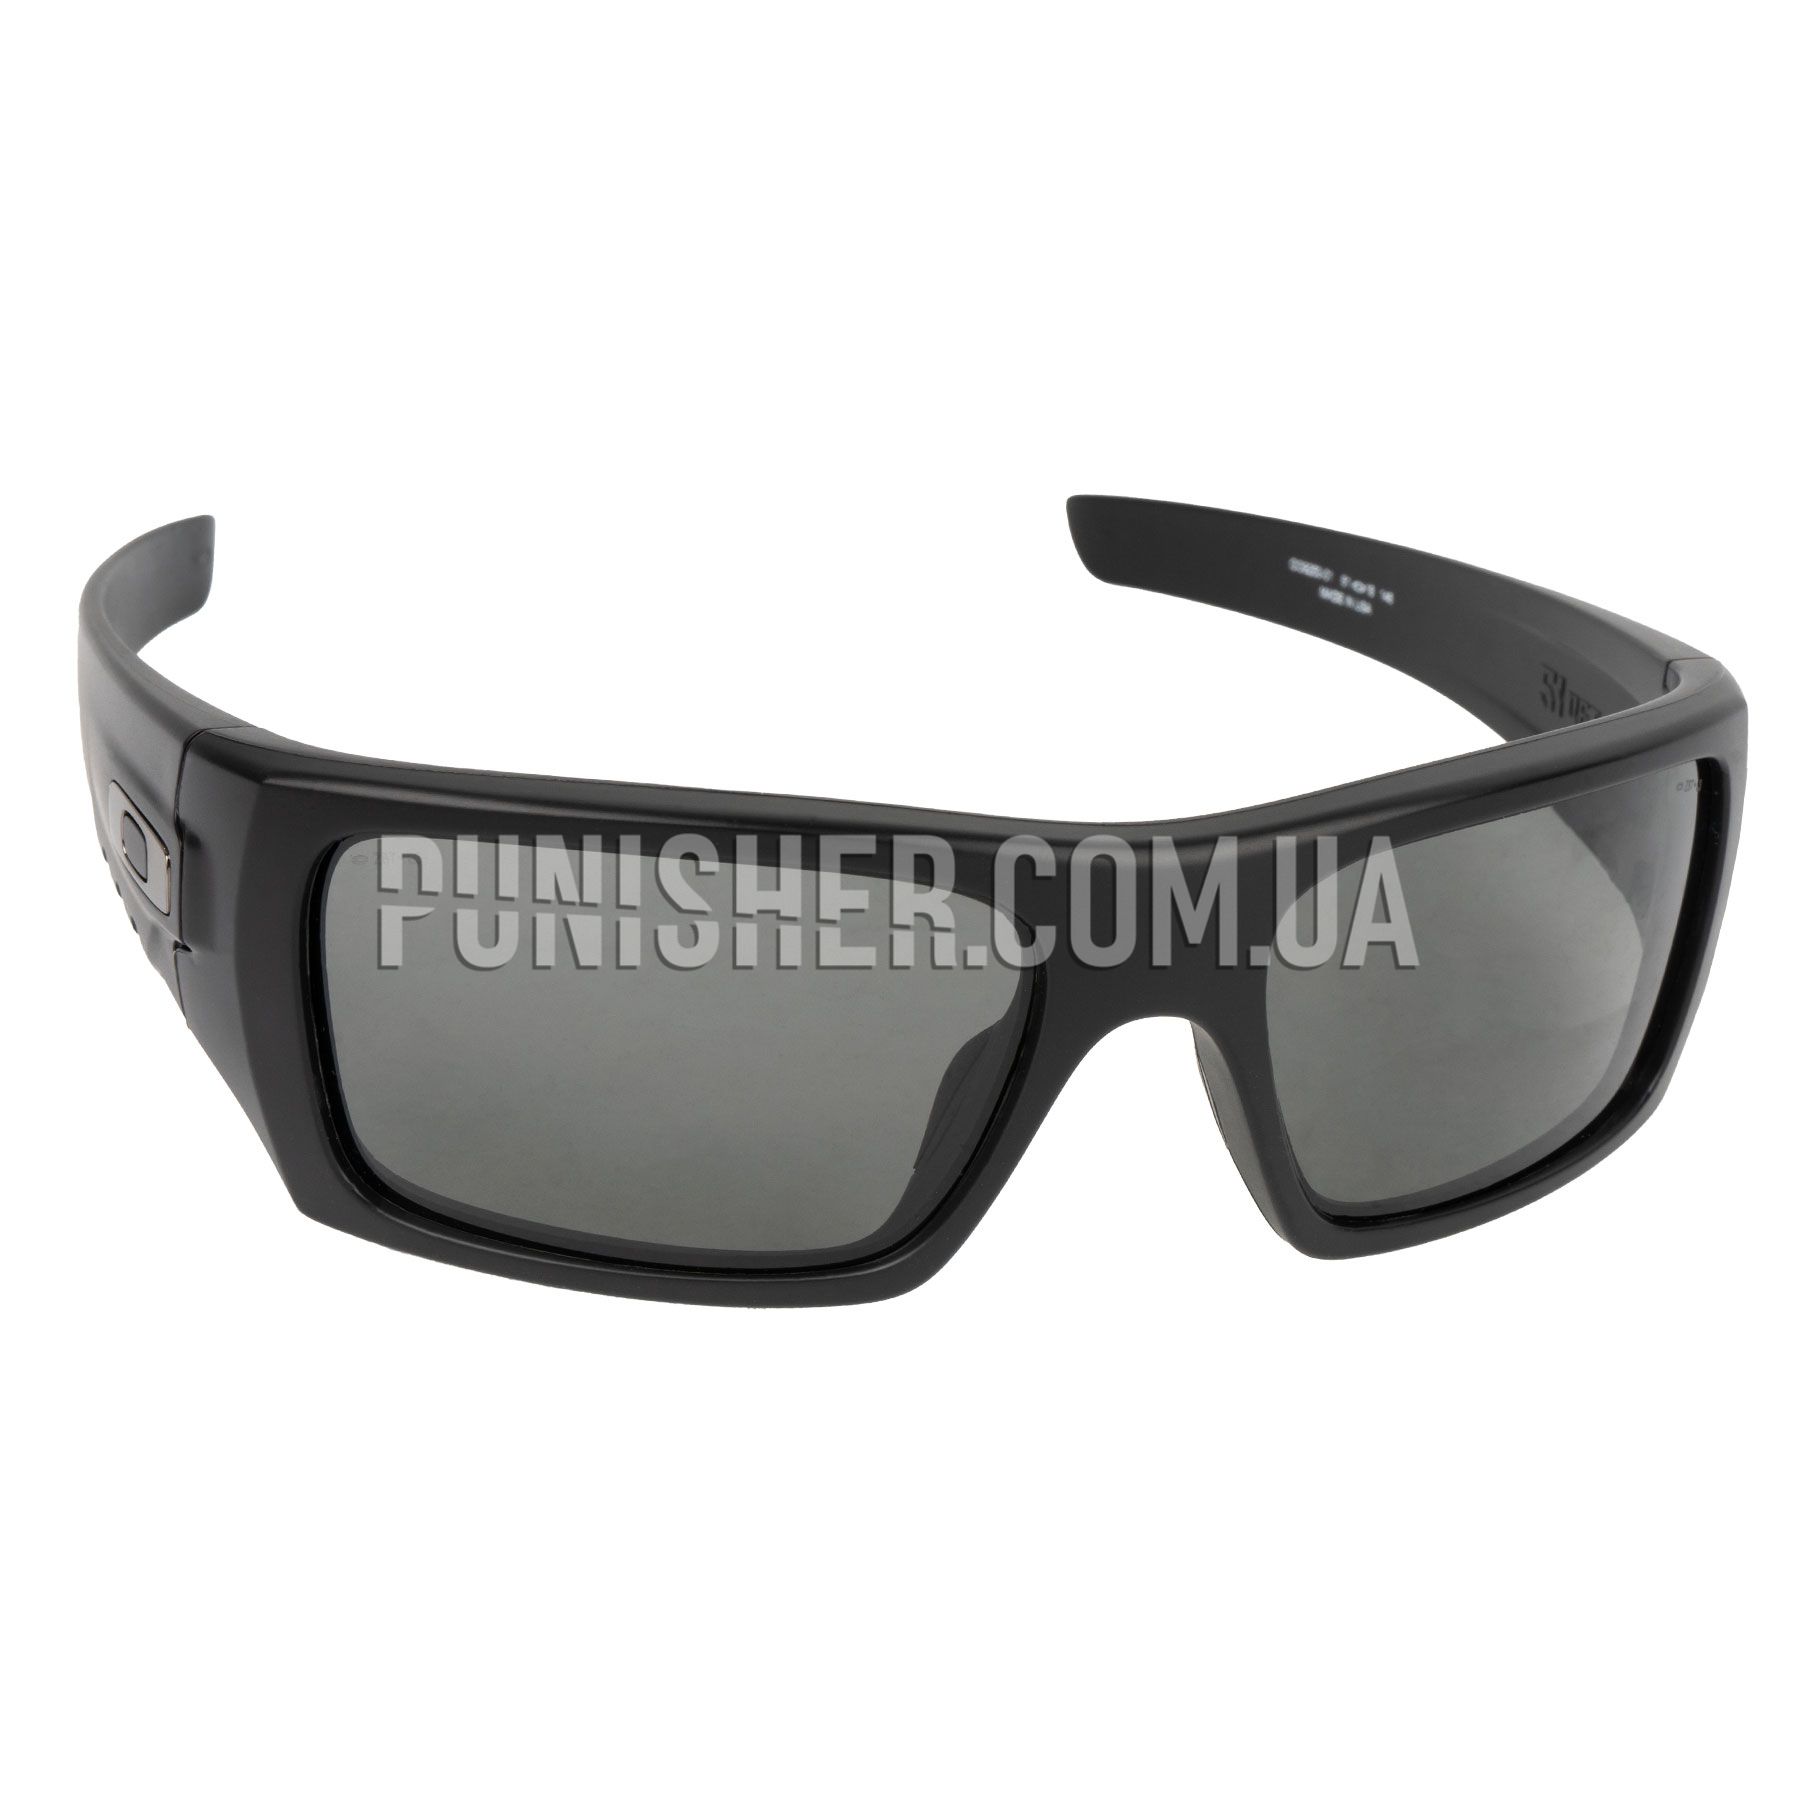 Marvel The Punisher Sun-shades Sunglasses Sun Staches for sale online | eBay